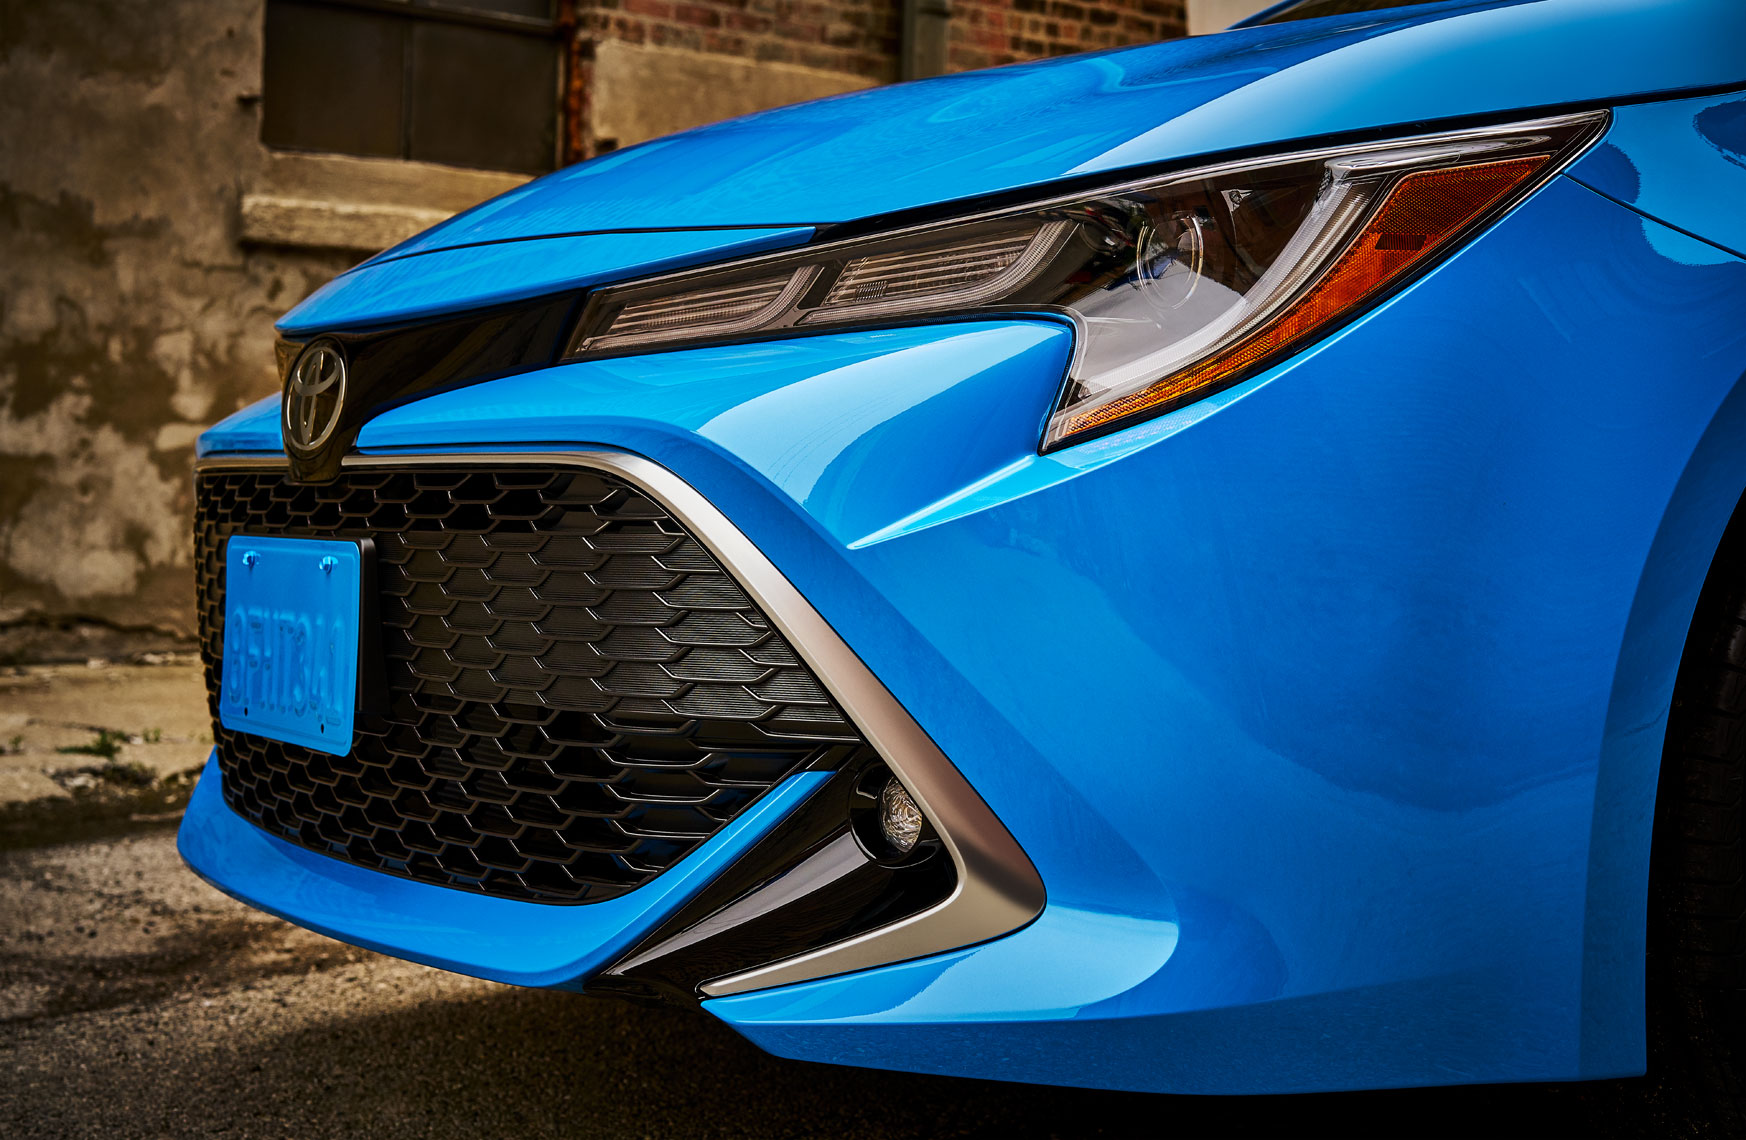 Location Photography Toyota Corolla XSE Grille Detail Chicago Alley